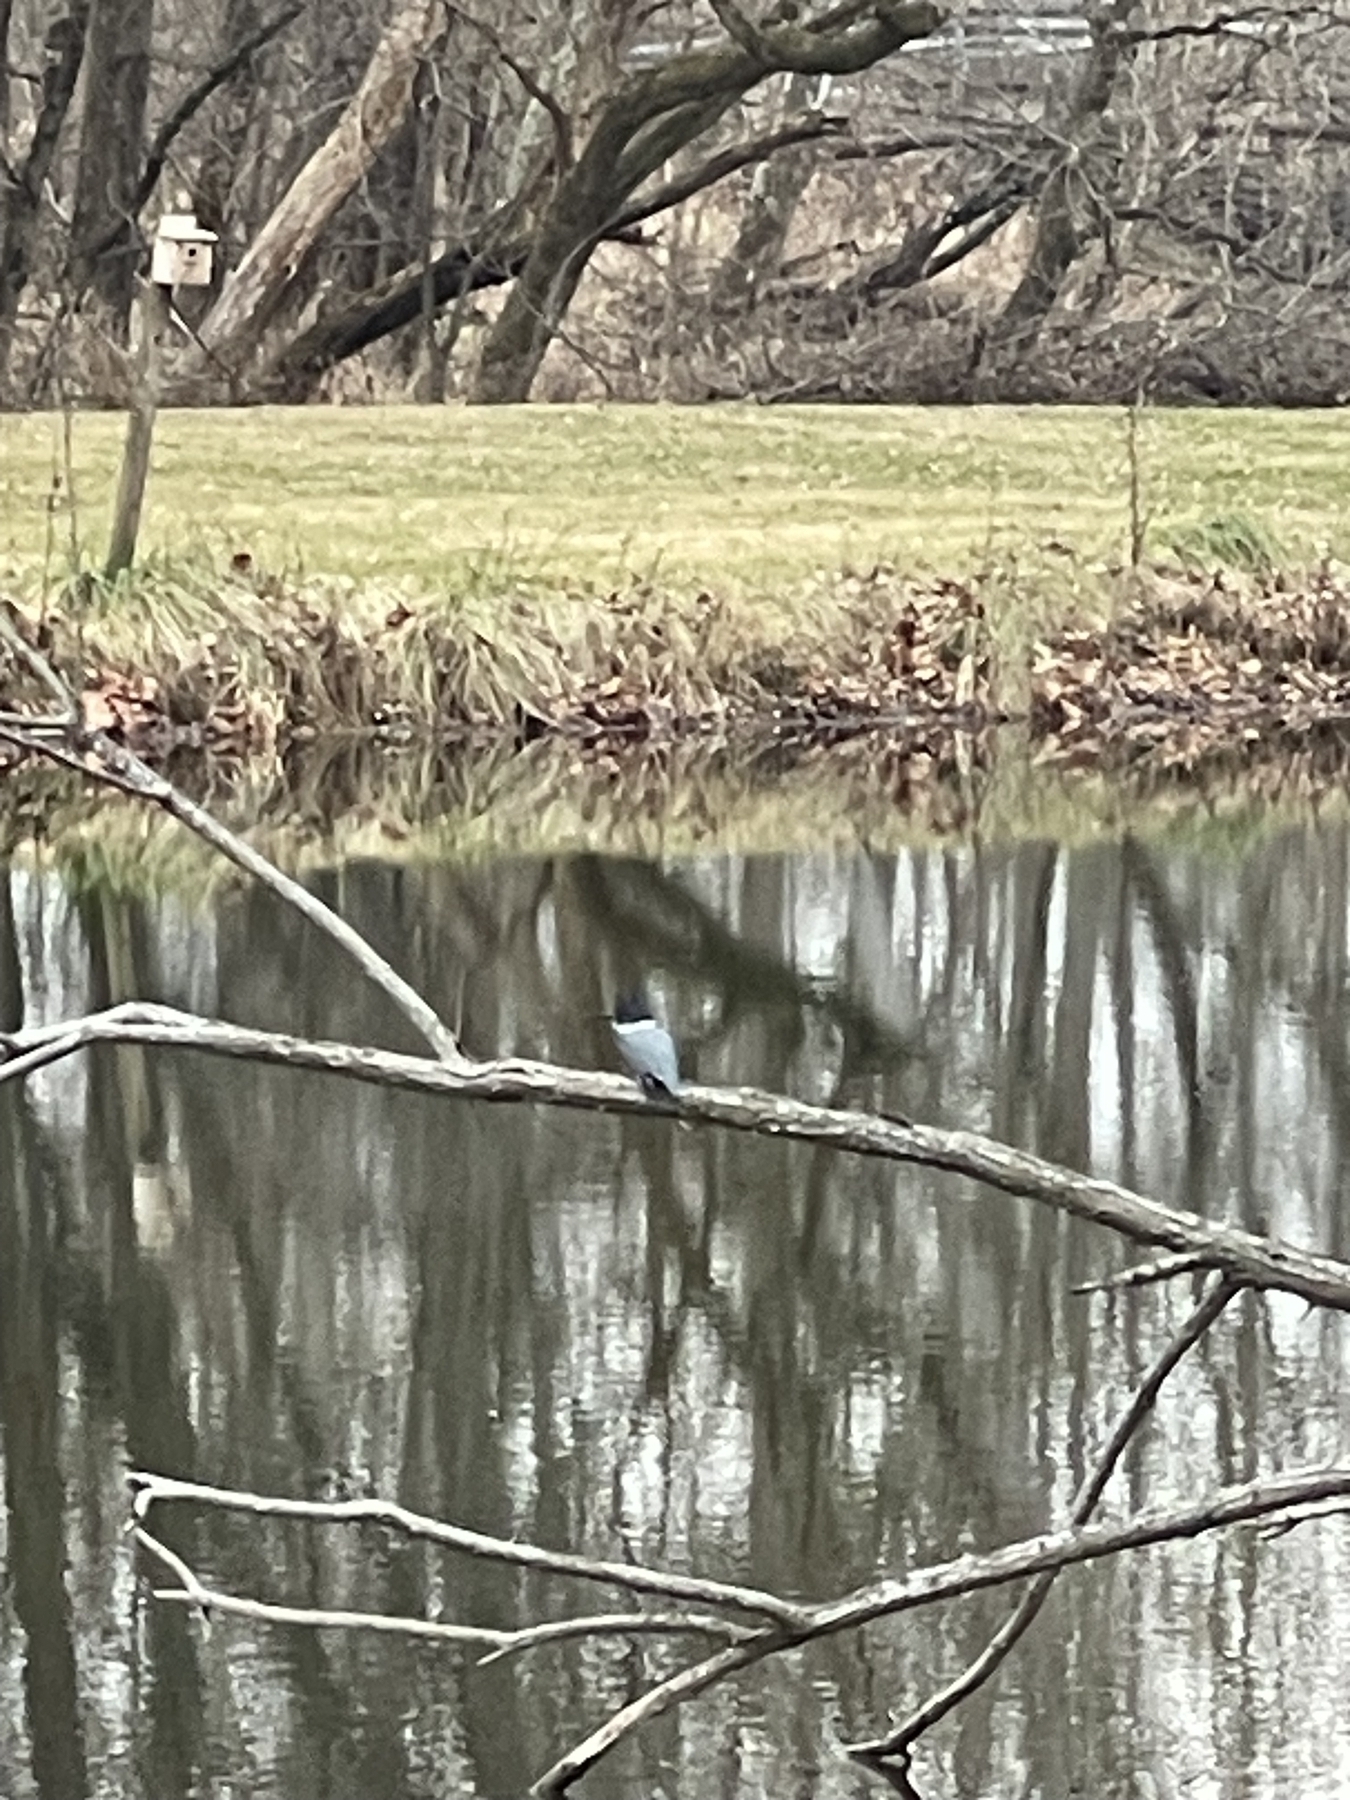 Female belted kingfisher on a downed willow limb hanging over a pond.